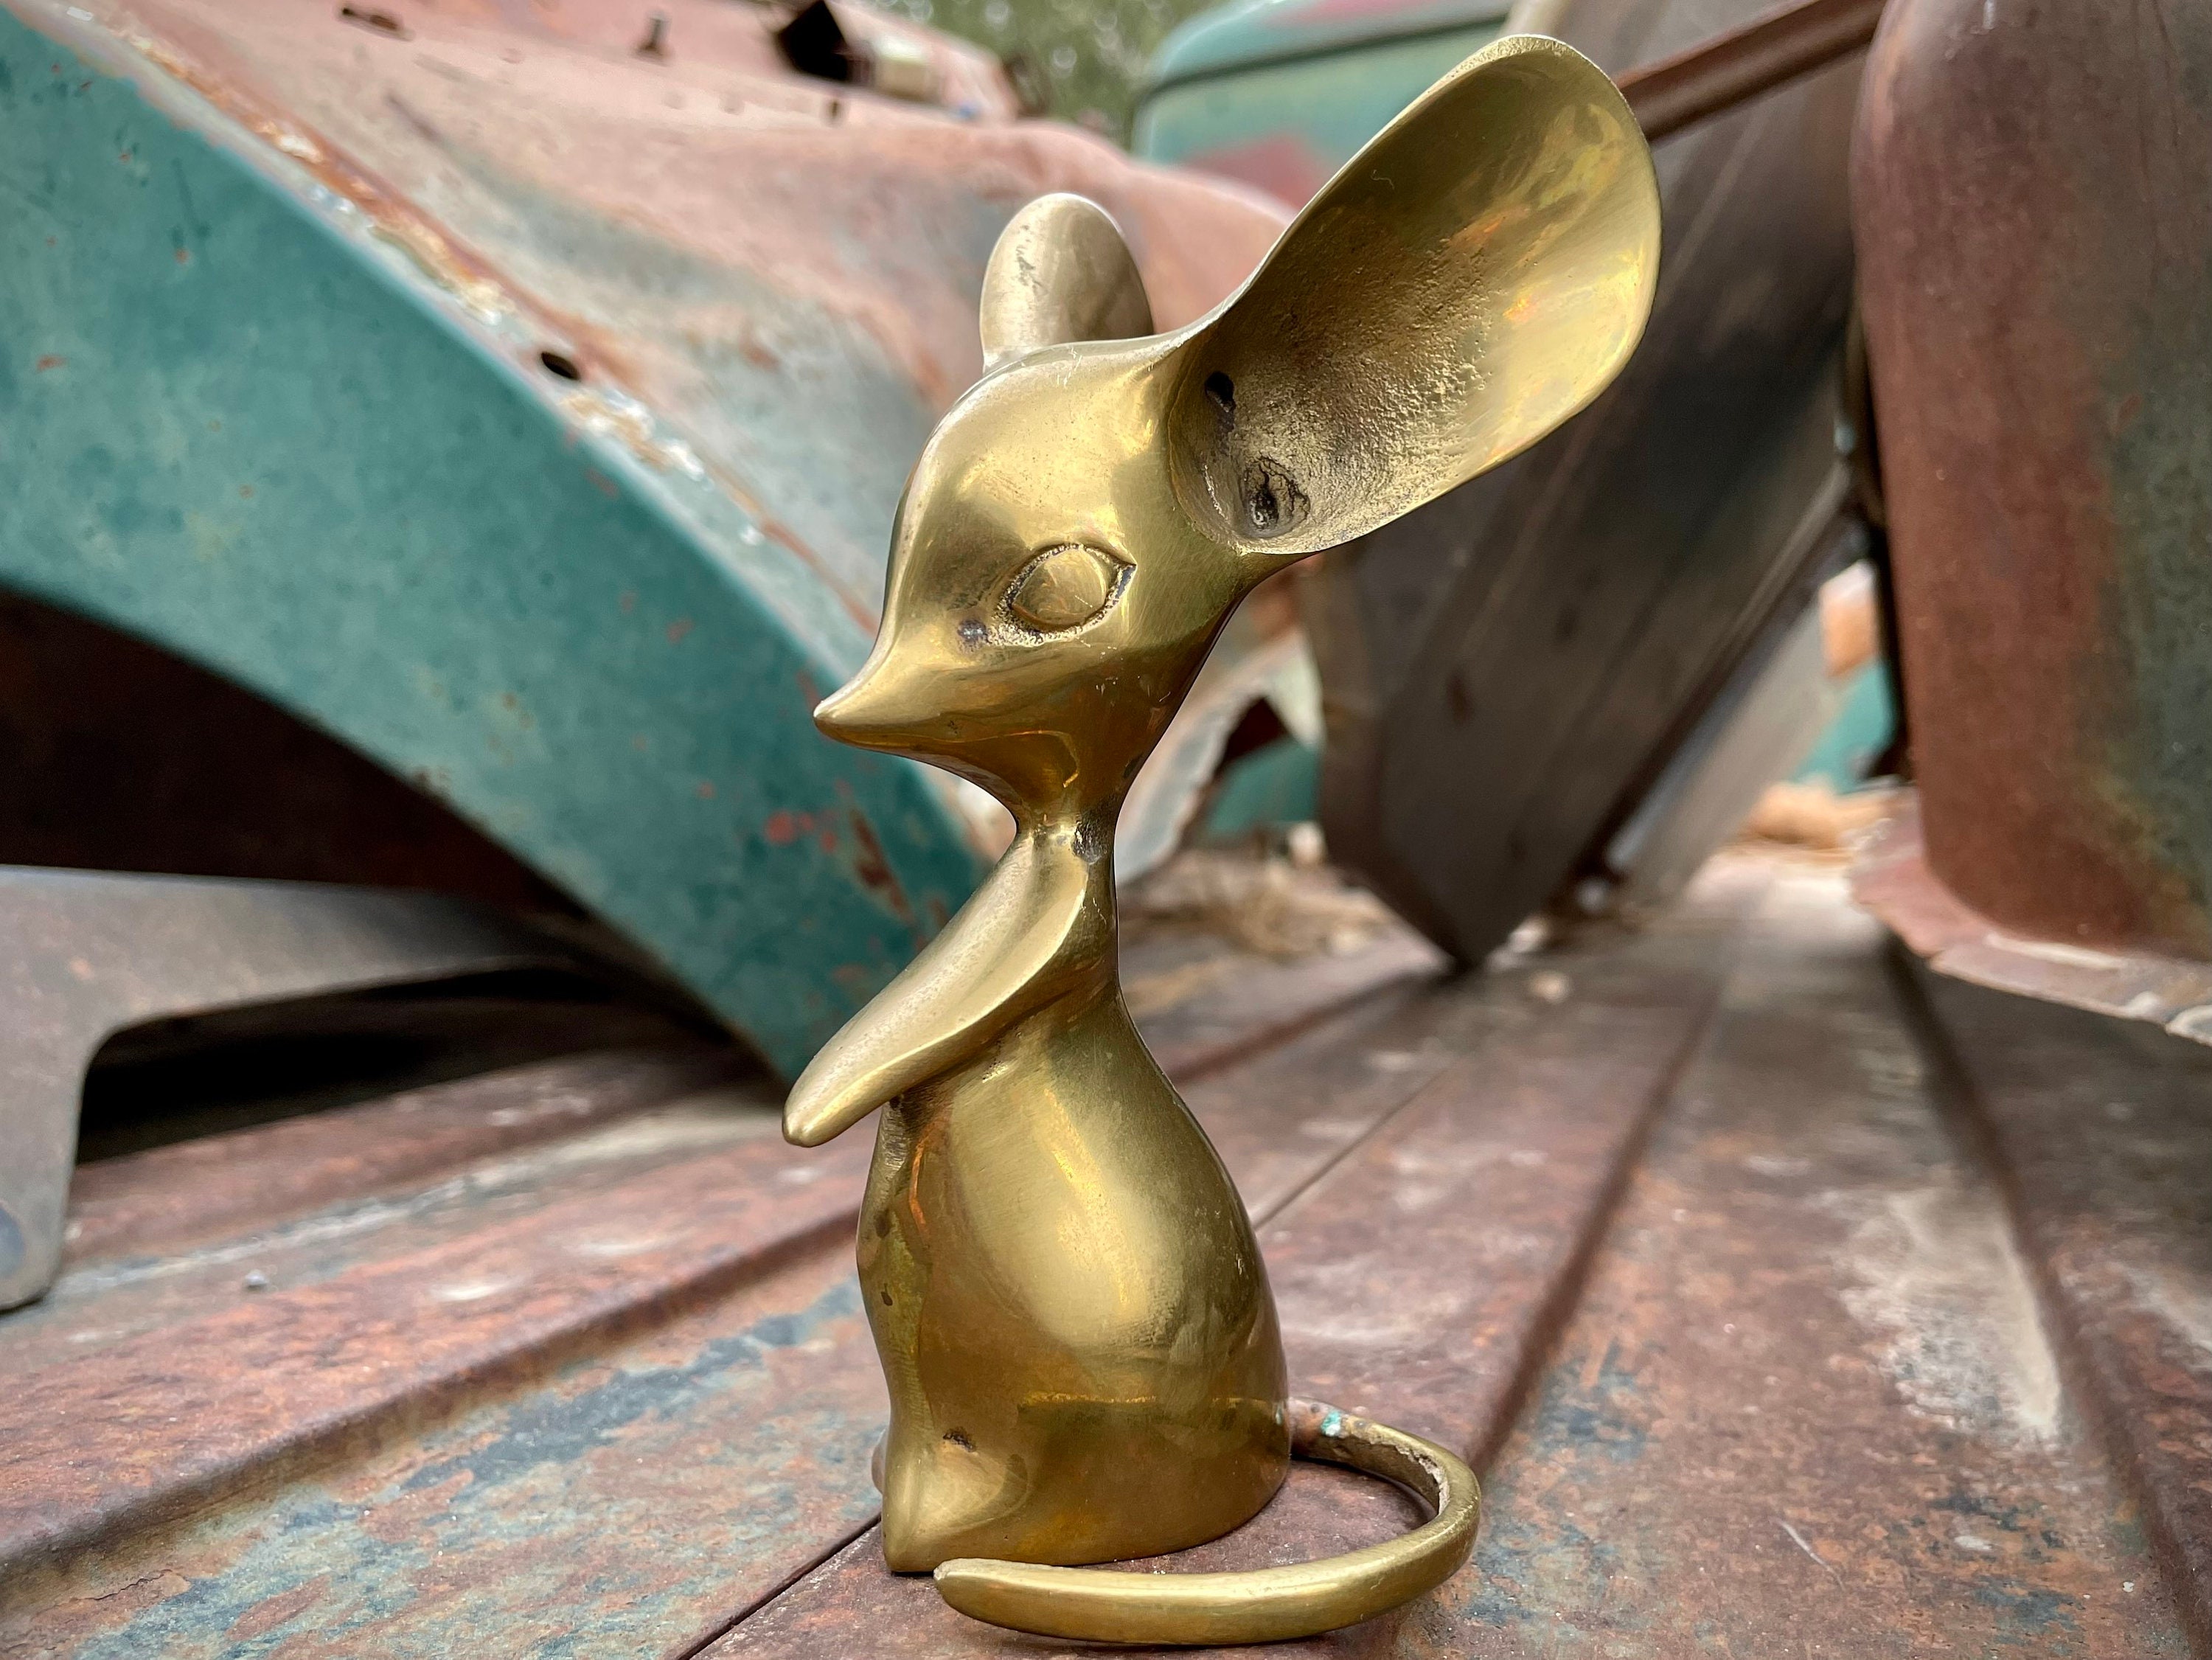 Vintage Solid Brass Mouse With Big Ears Curled Tail Figurine